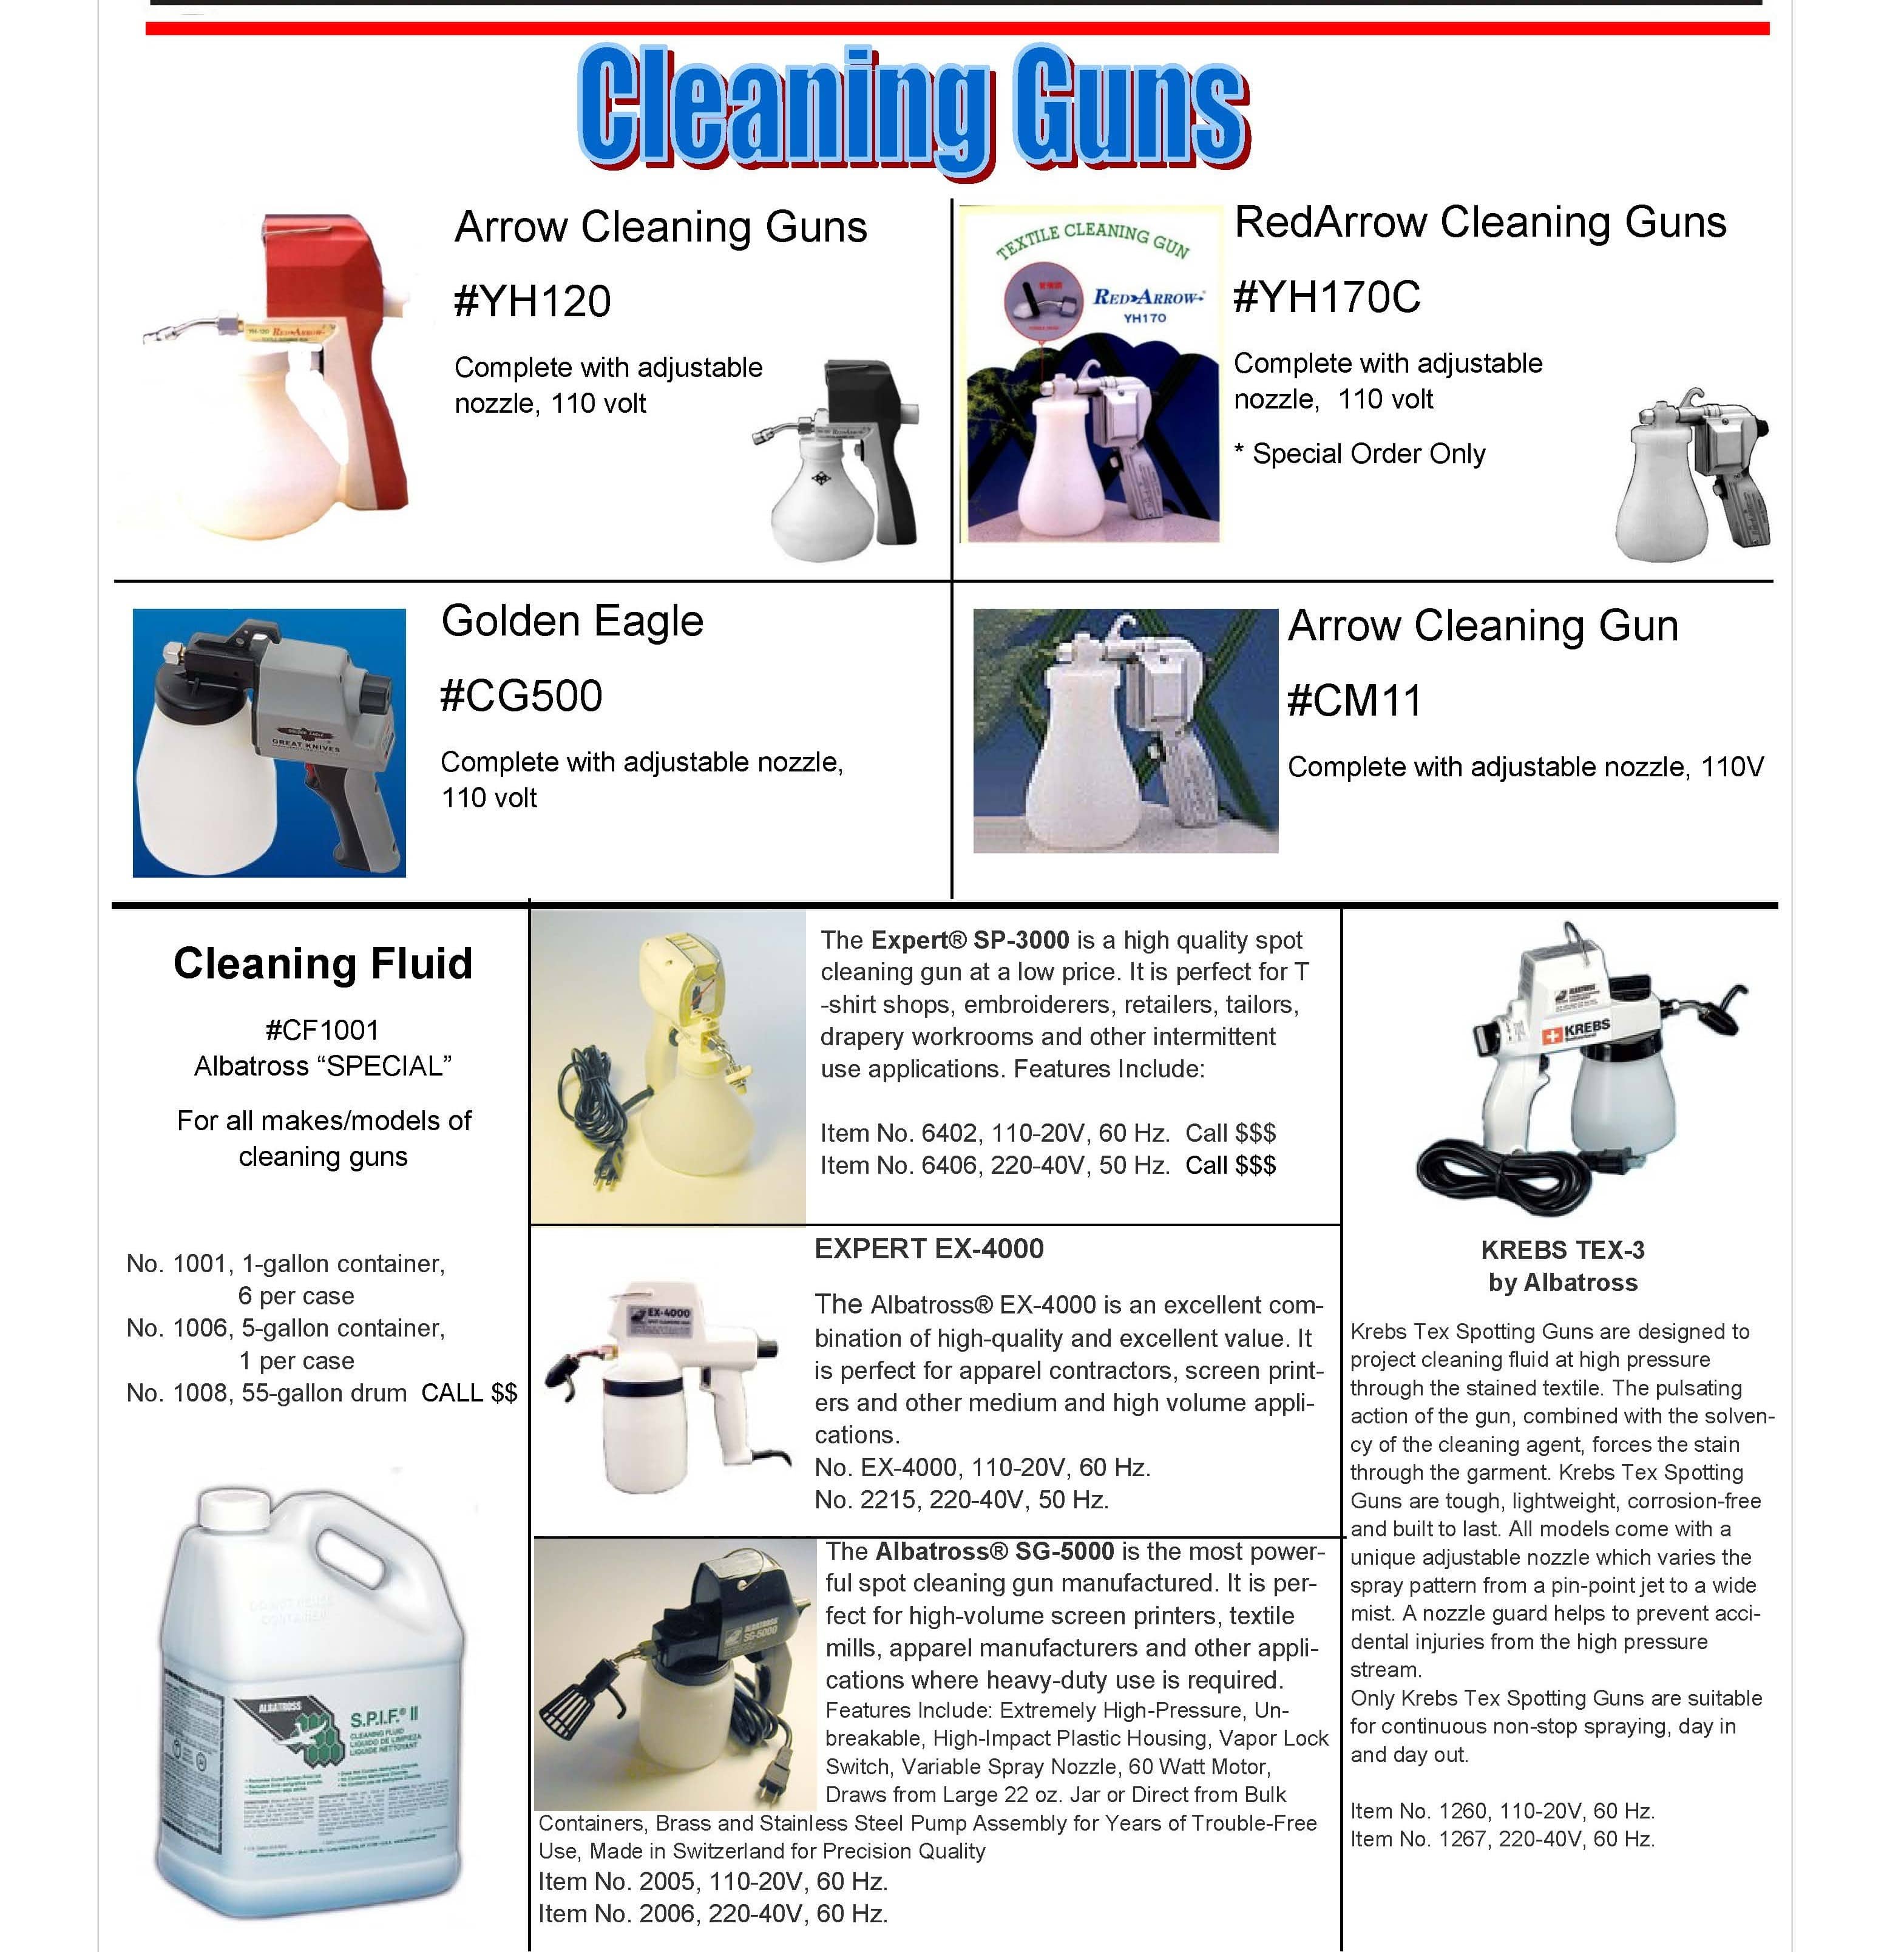 PROFESSIONAL CLEANING GUNS for FABRICS
ARROW CLEANING GUNS YH120, REDARROW CLEANIN GUNS YH170C,
GOLDEN EAGLE CLEANING GUNS CG500, ARROW CLEANING GUNS CM11